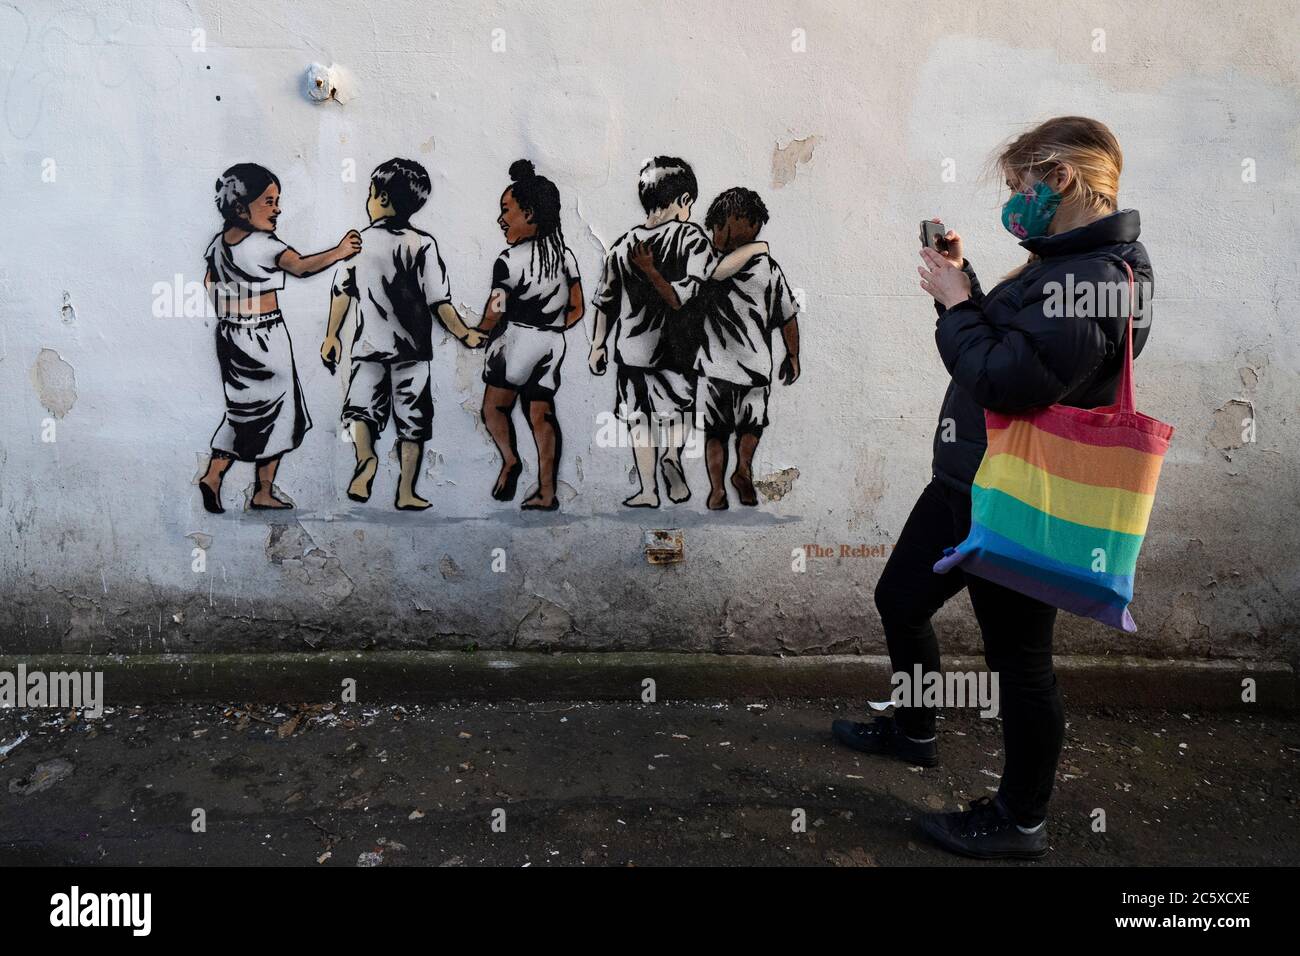 Edinburgh, Scotland, UK. 5 July, 2020. A new mural by the street artist The Rebel Bear has appeared on a building in Edinburgh. The new anti-racism mural shows children of various ethnicities together. Iain Masterton/Alamy Live News Stock Photo